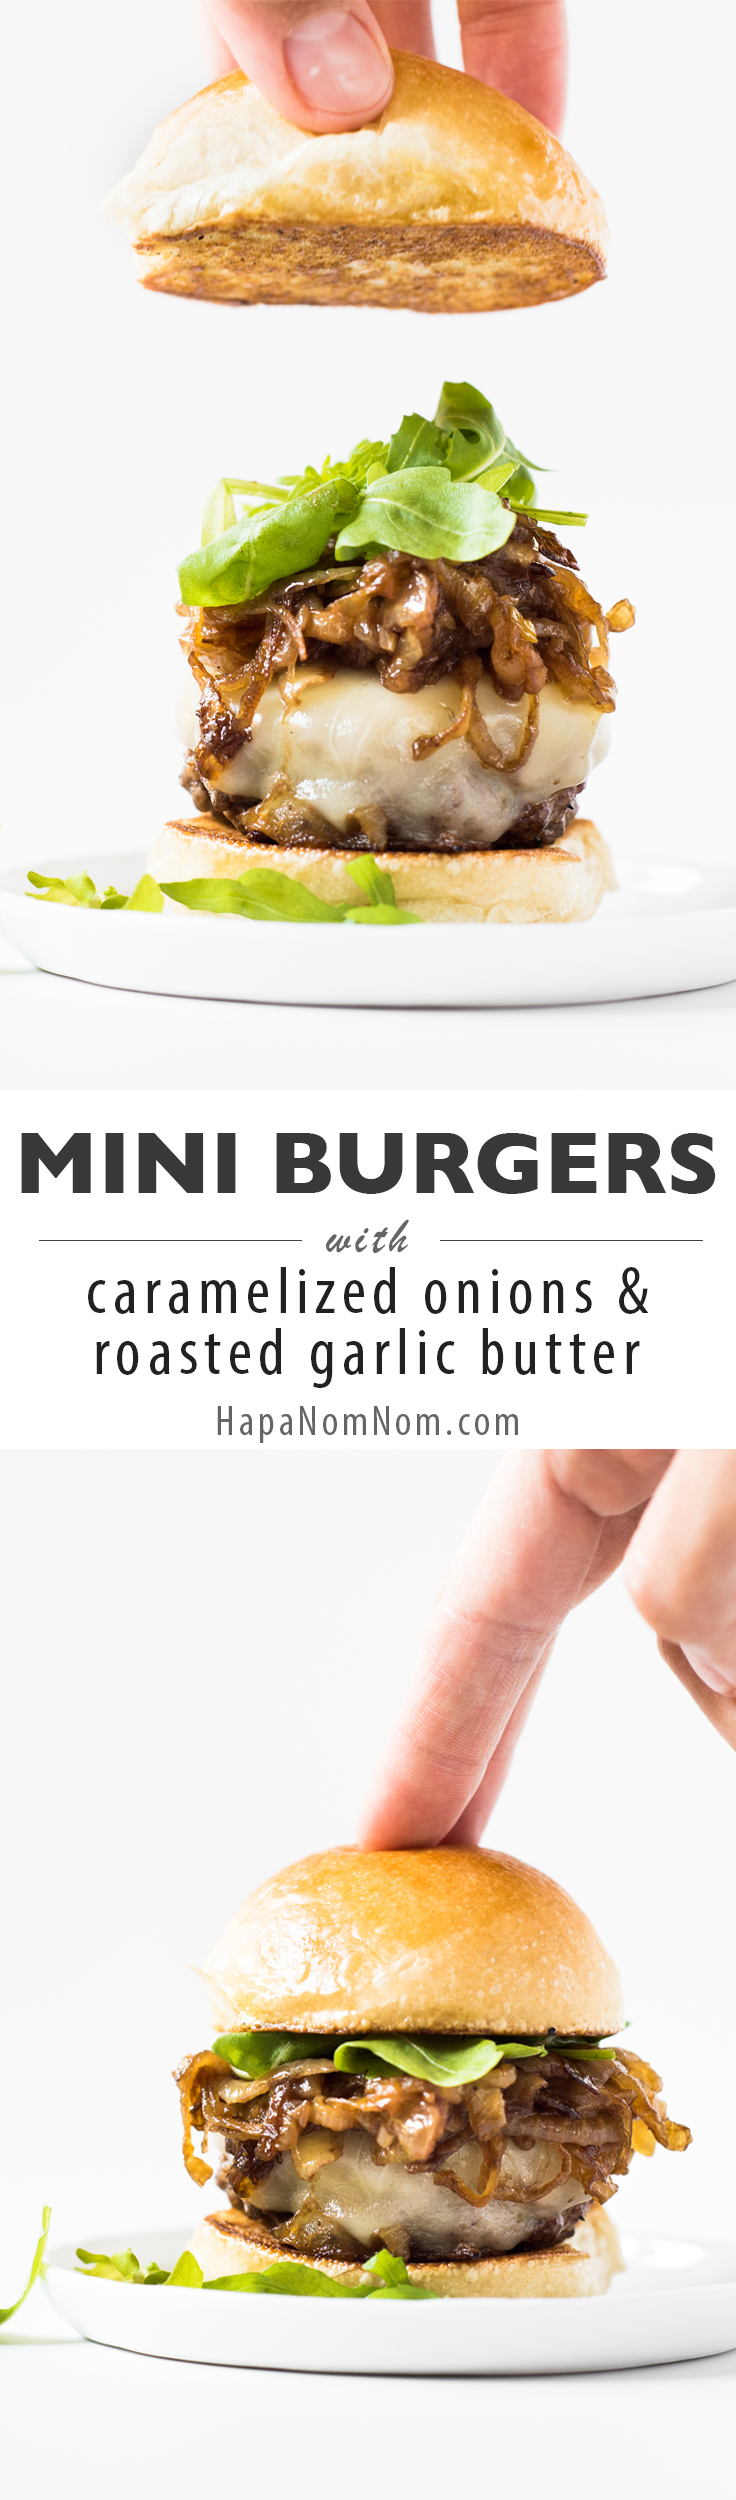 Mini Burgers with Caramelized Onions & Roasted Garlic Butter